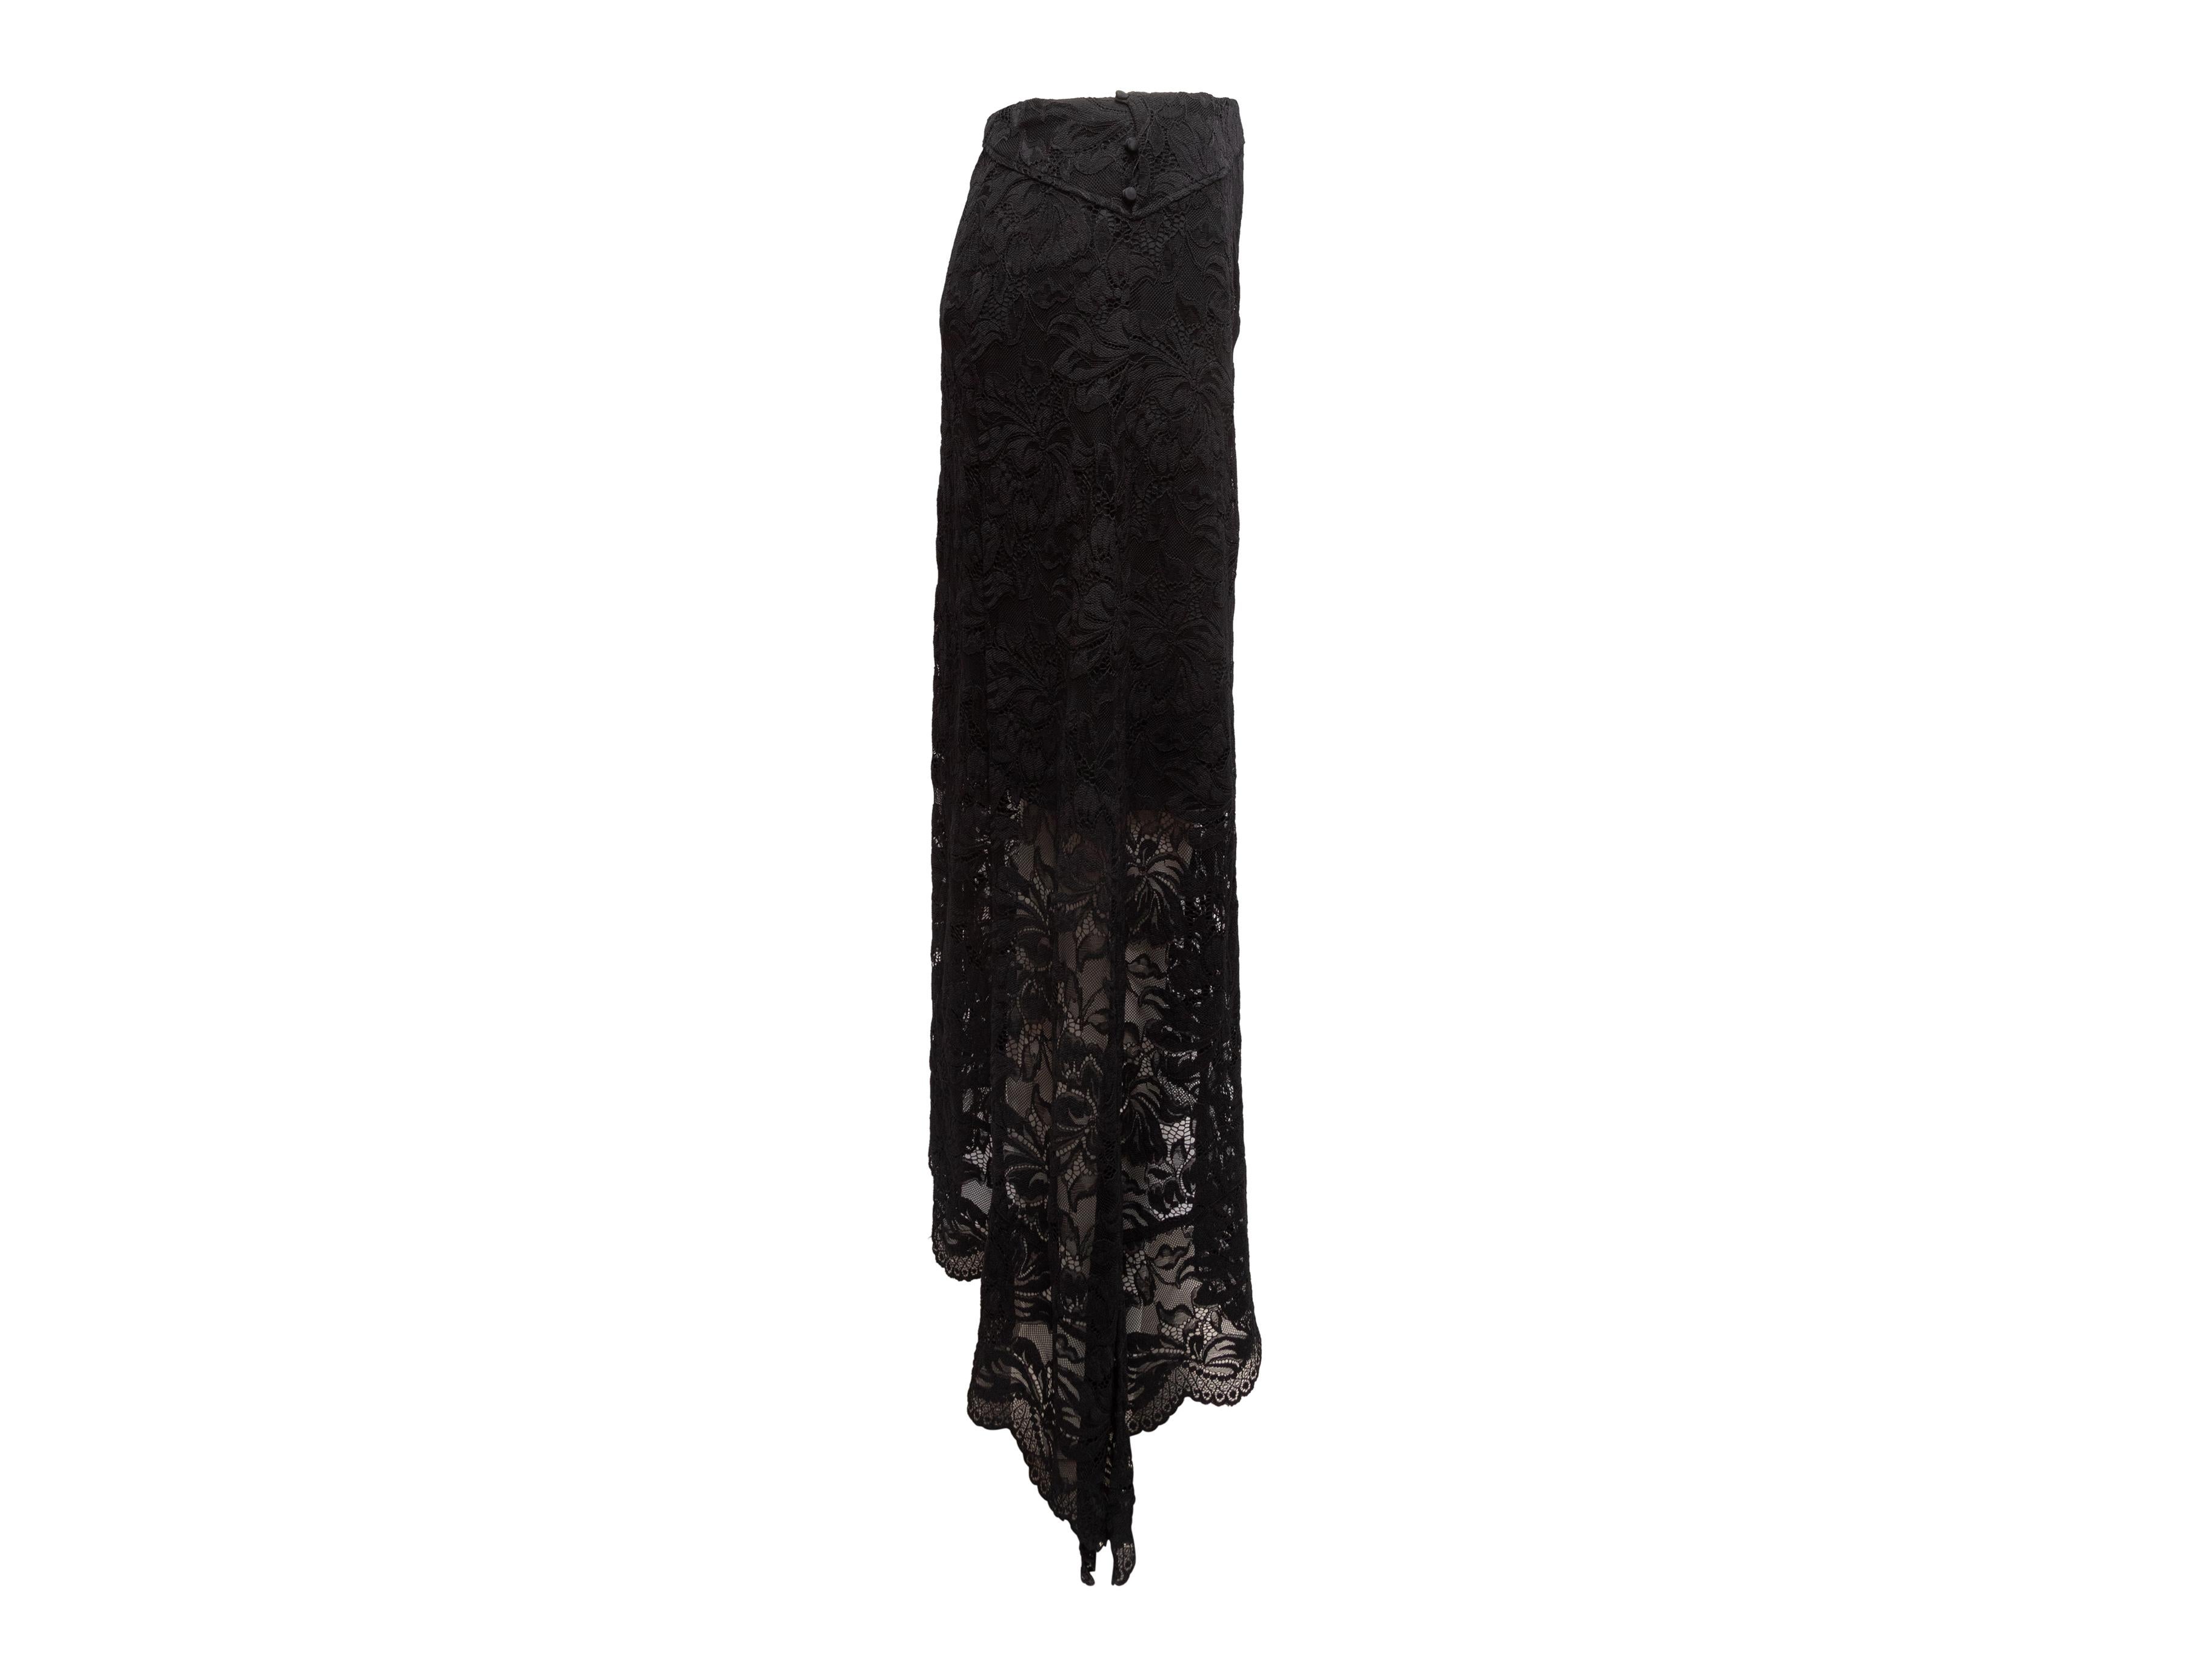 Product Details: Black lace maxi skirt by Paco Rabanne. Button closures at side. Designer size 40. 26